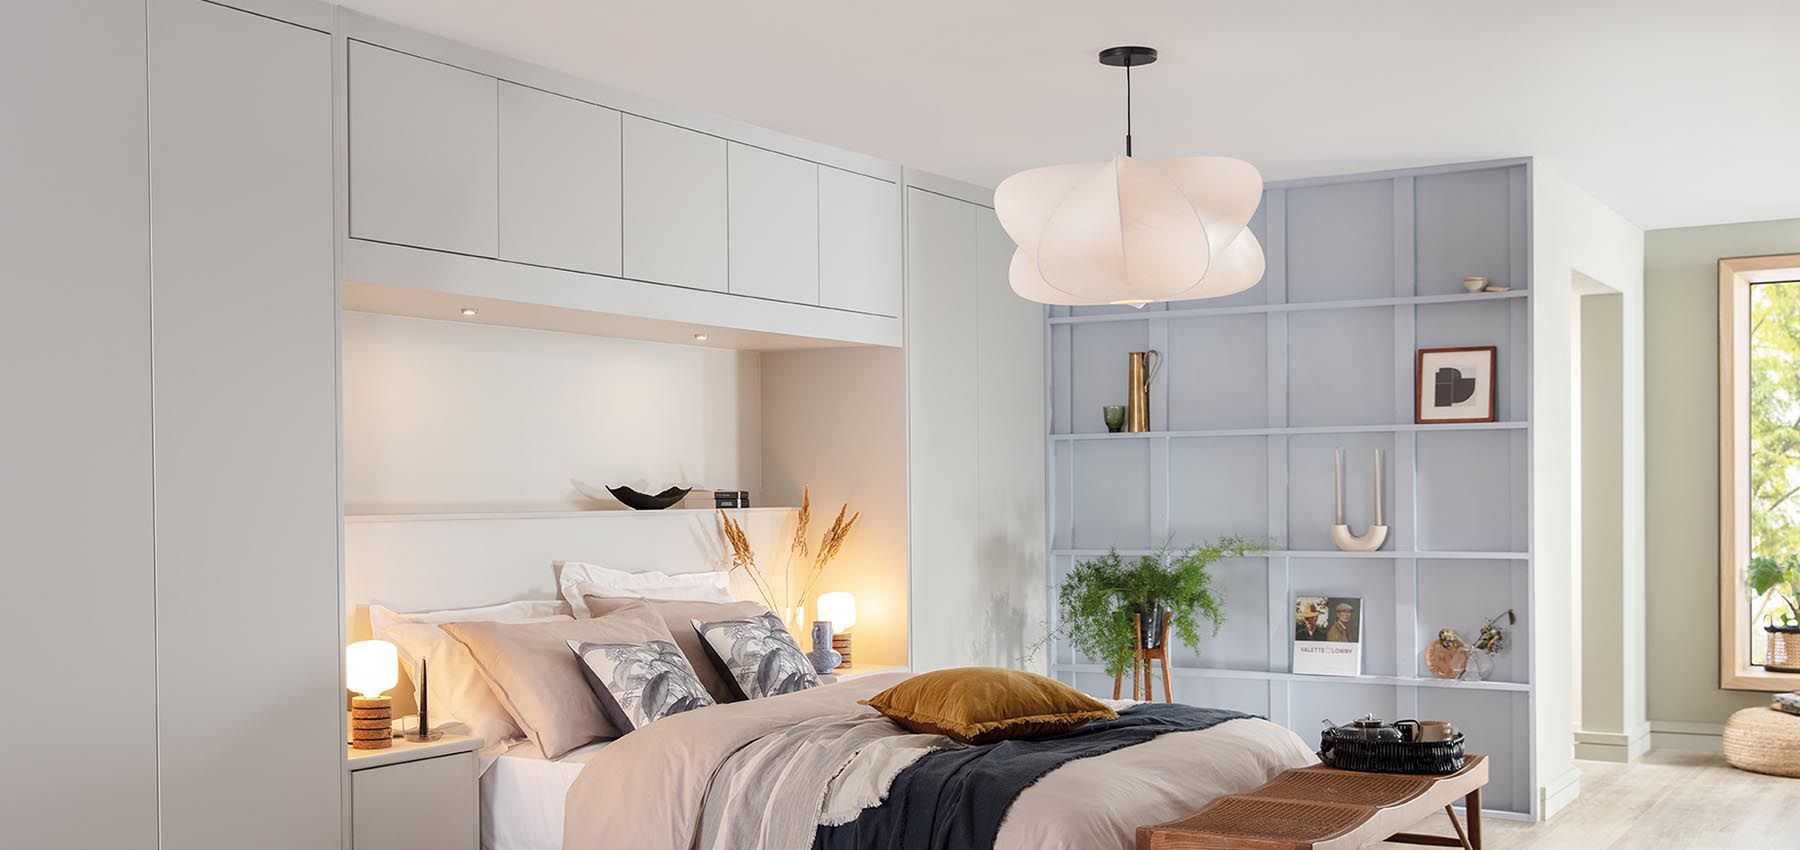 5 Reasons Why You'll Love Overbed Storage | Sharps In Overbed Wardrobes (View 8 of 15)